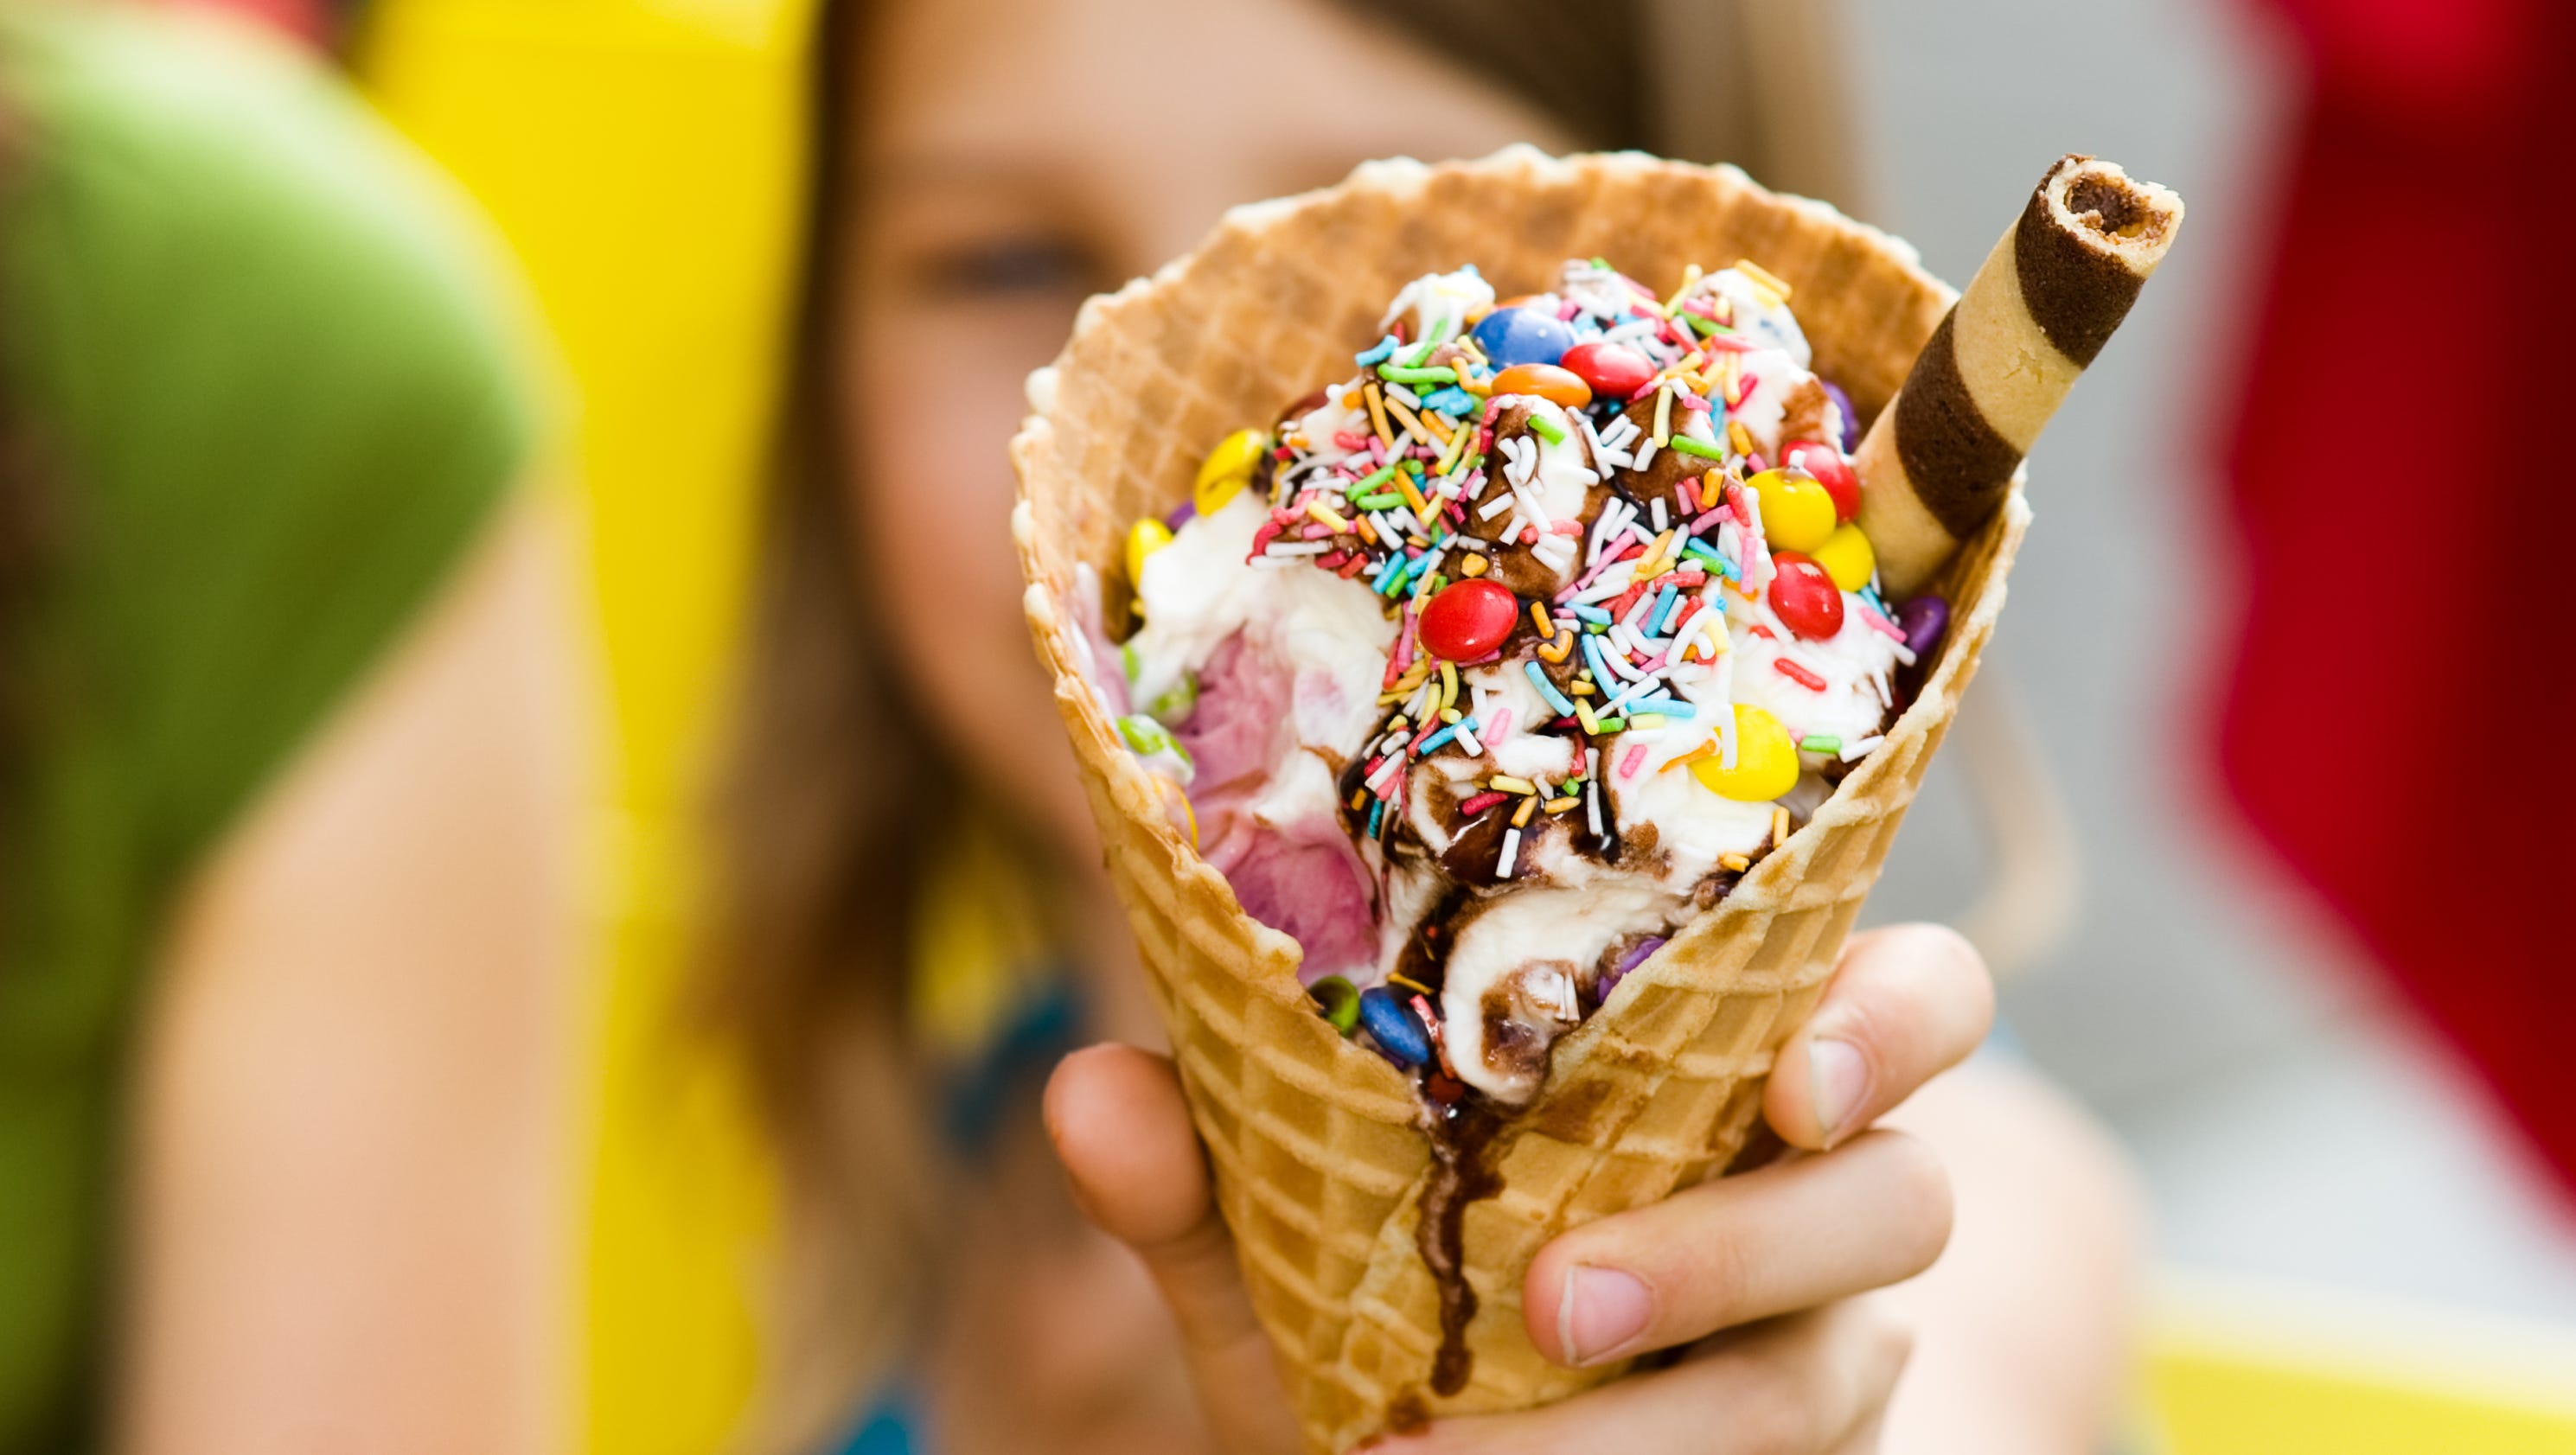 10-ice-cream-cones-to-try-before-summer-ends